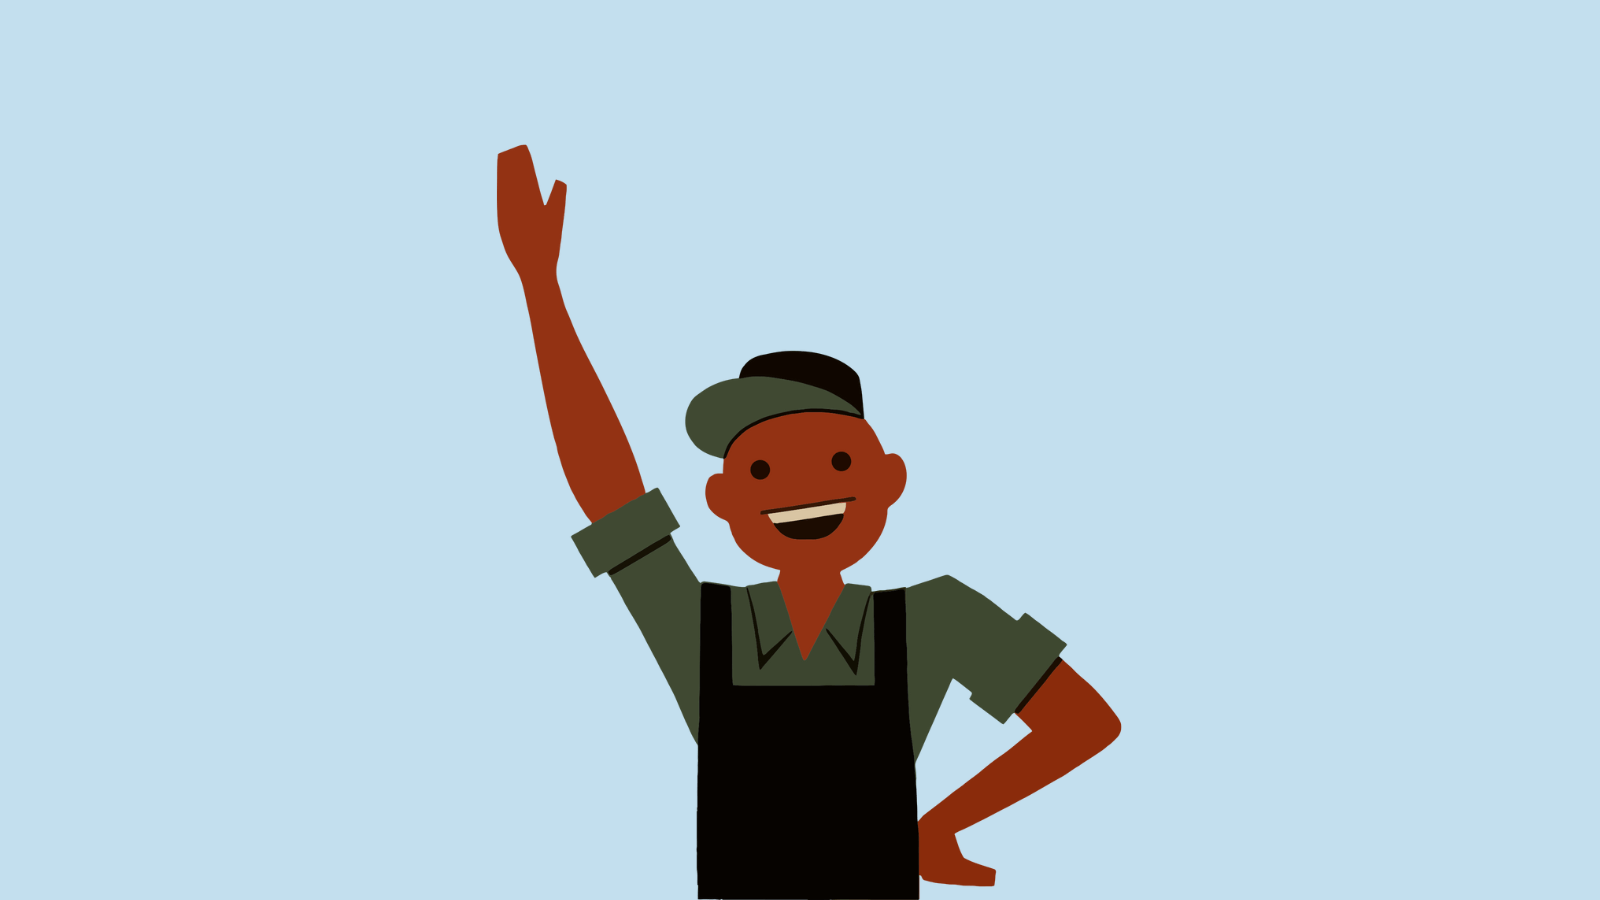 A food service worker wearing an apron and a baseball cap